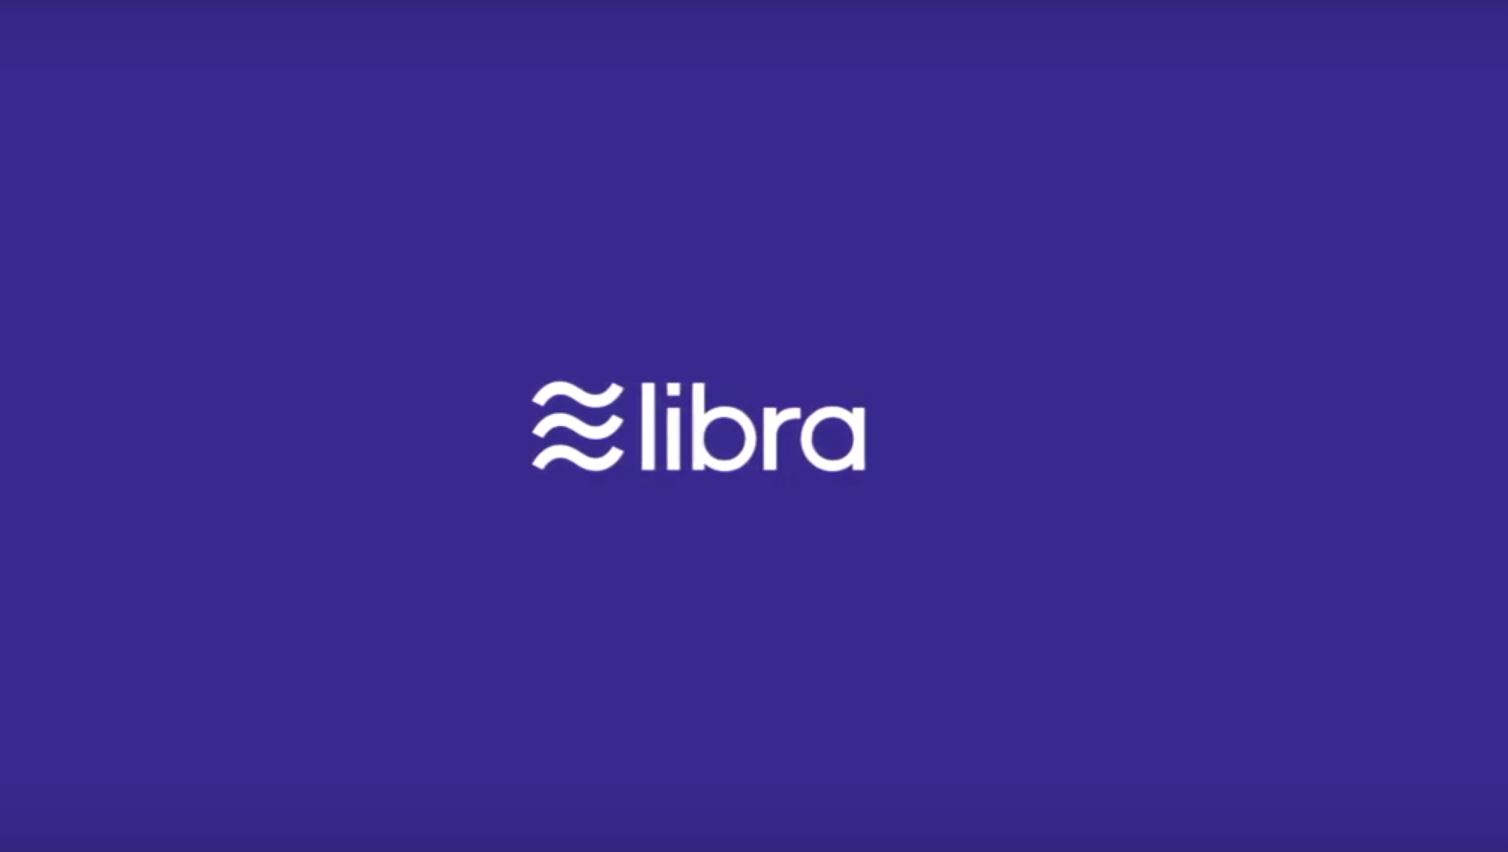 Libra Association Meets for the First Time with 21 Members